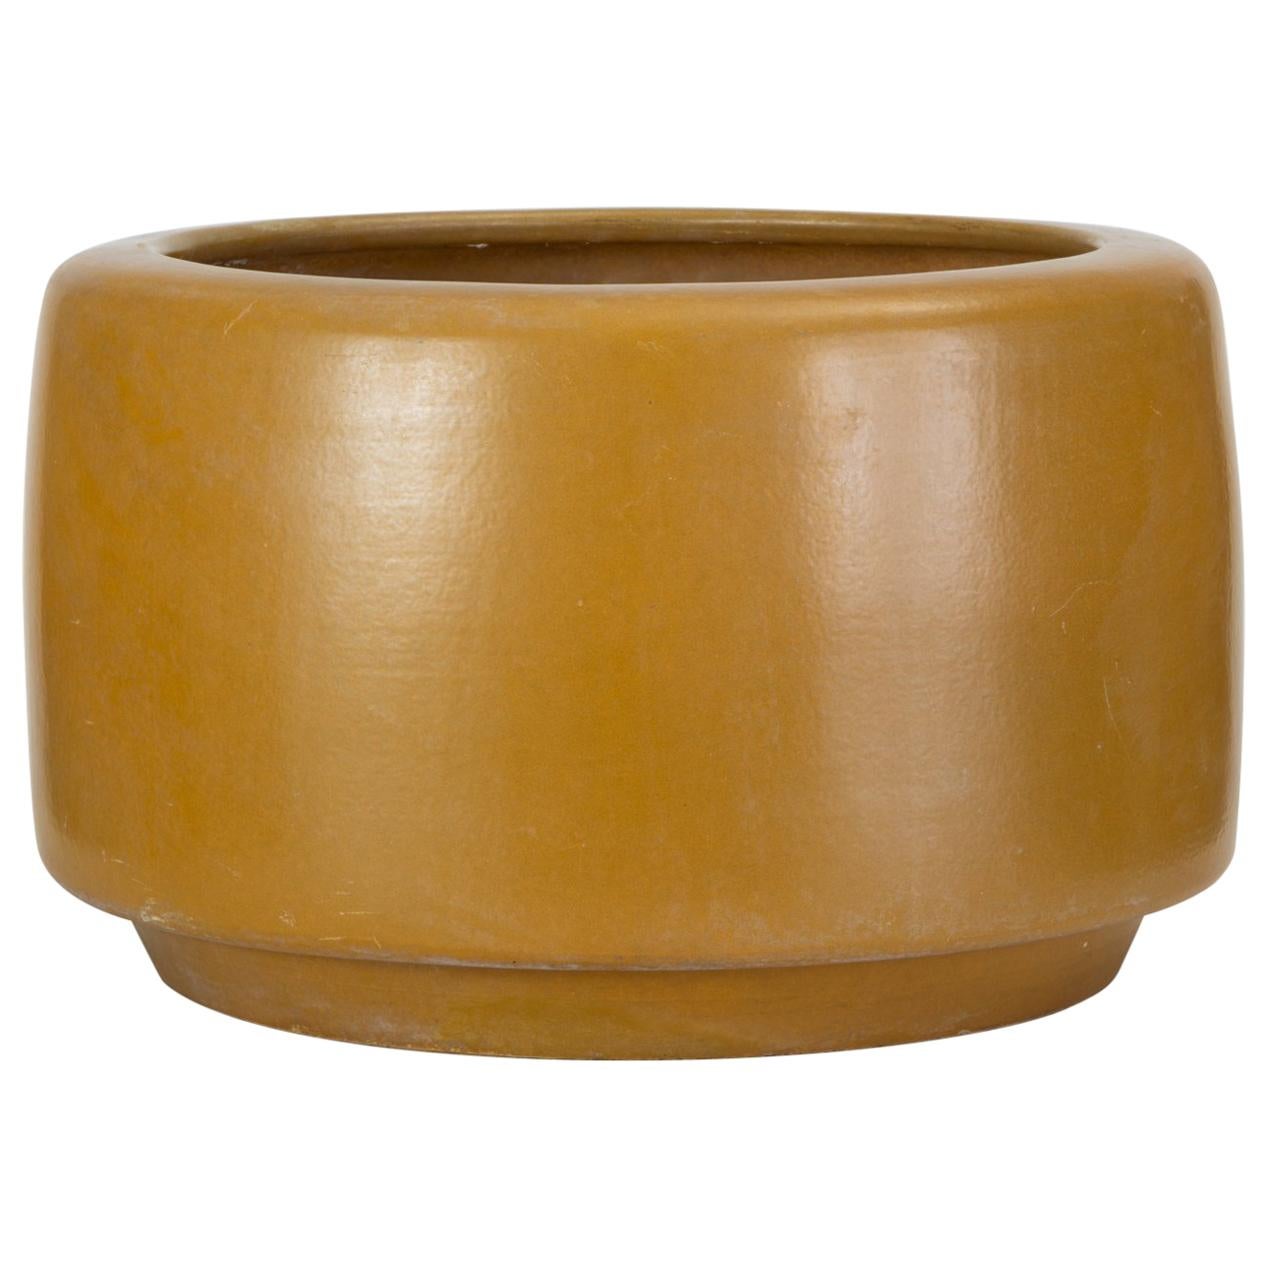 CP-17 Tire Planter by John Follis for Architectural Pottery in Yellow Glaze